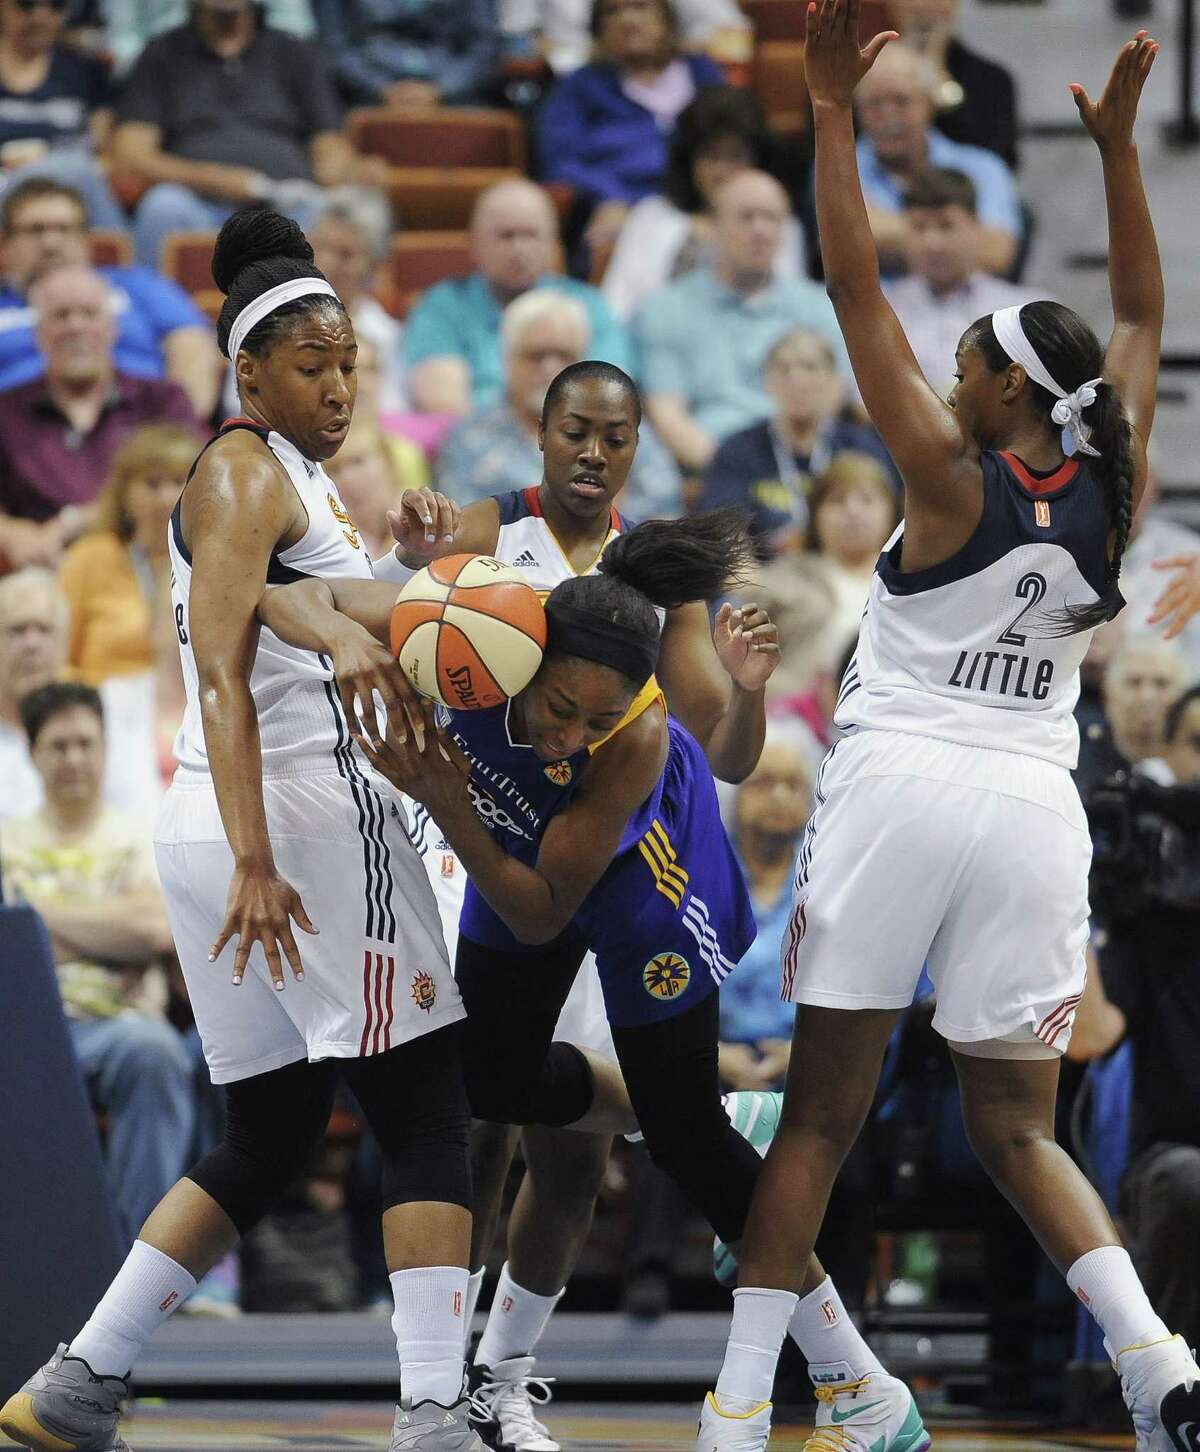 The Los Angeles Sparks’ Nneka Ogwumike, center, stumbles under pressure from the Connecticut Sun’s Kelsey Bone, left, and Camille Little, right, during a recent game.